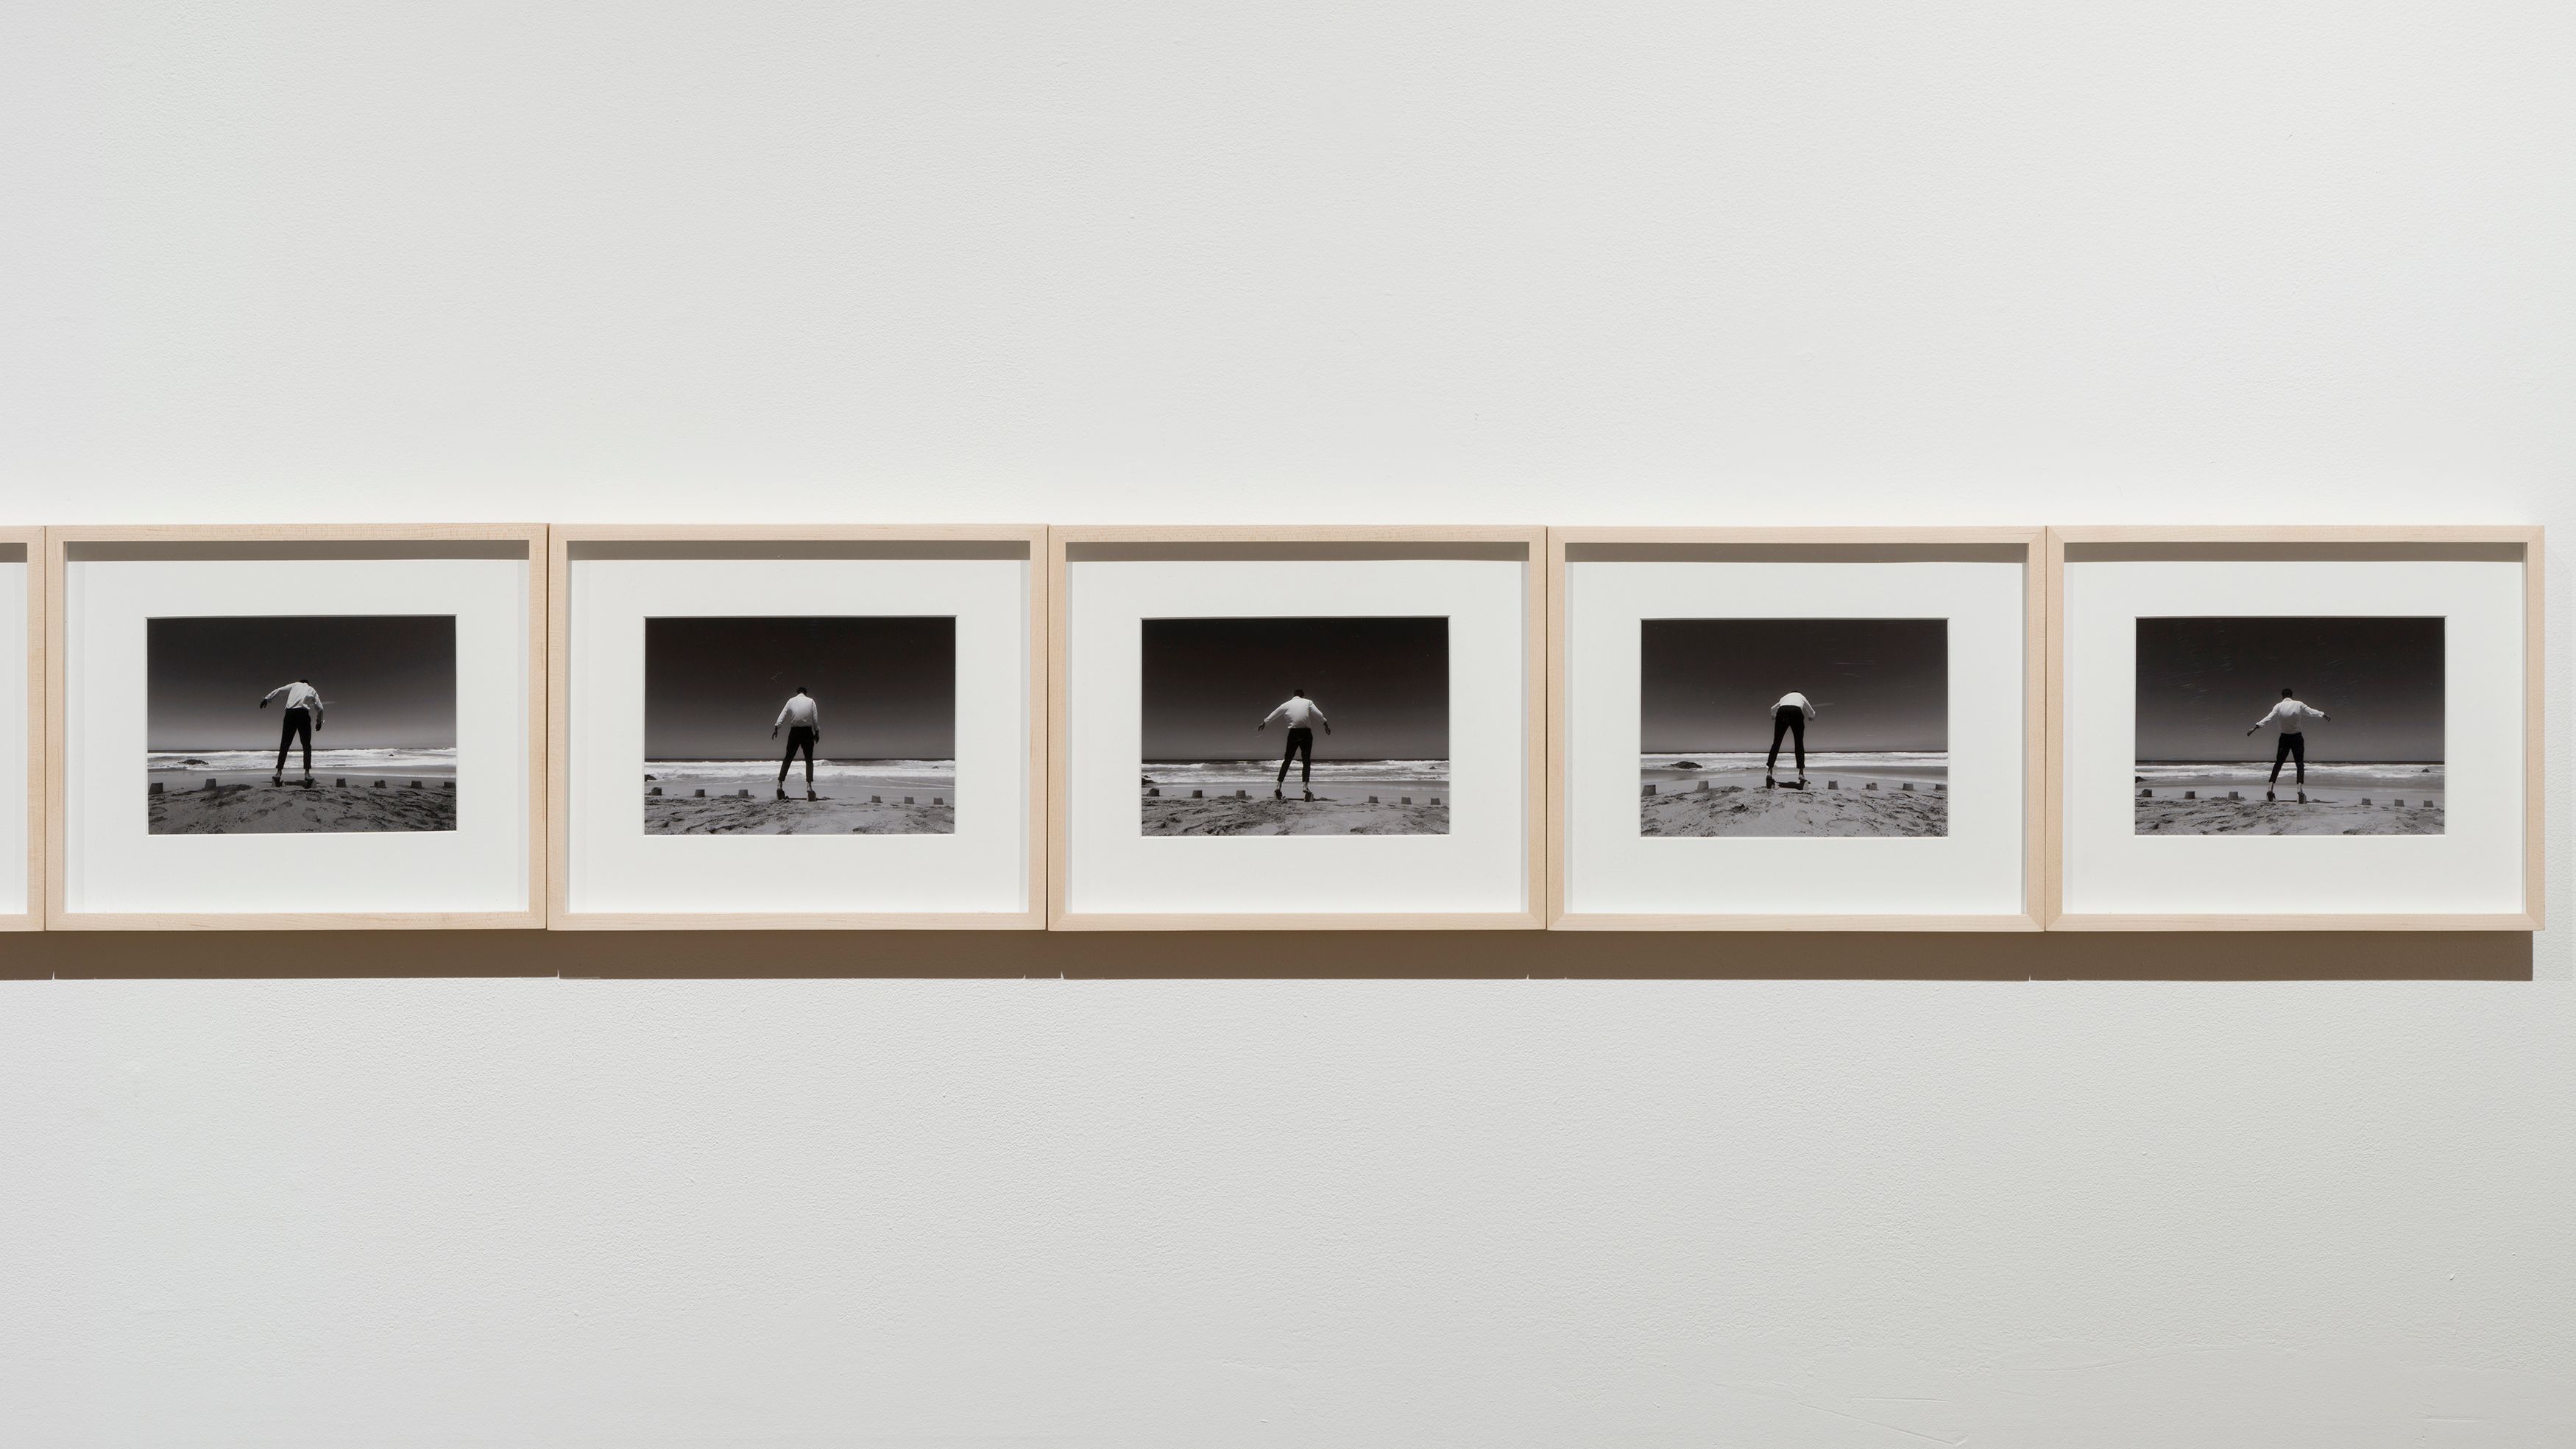 Rafal Bujnowski, Sand Castles, 2018 (printed 2022) detail of B&amp;W photograph in ten panels, 18.5 x 12.4 cm each (7 1/4 x 4 7/8 in. each), overall dimensions variable